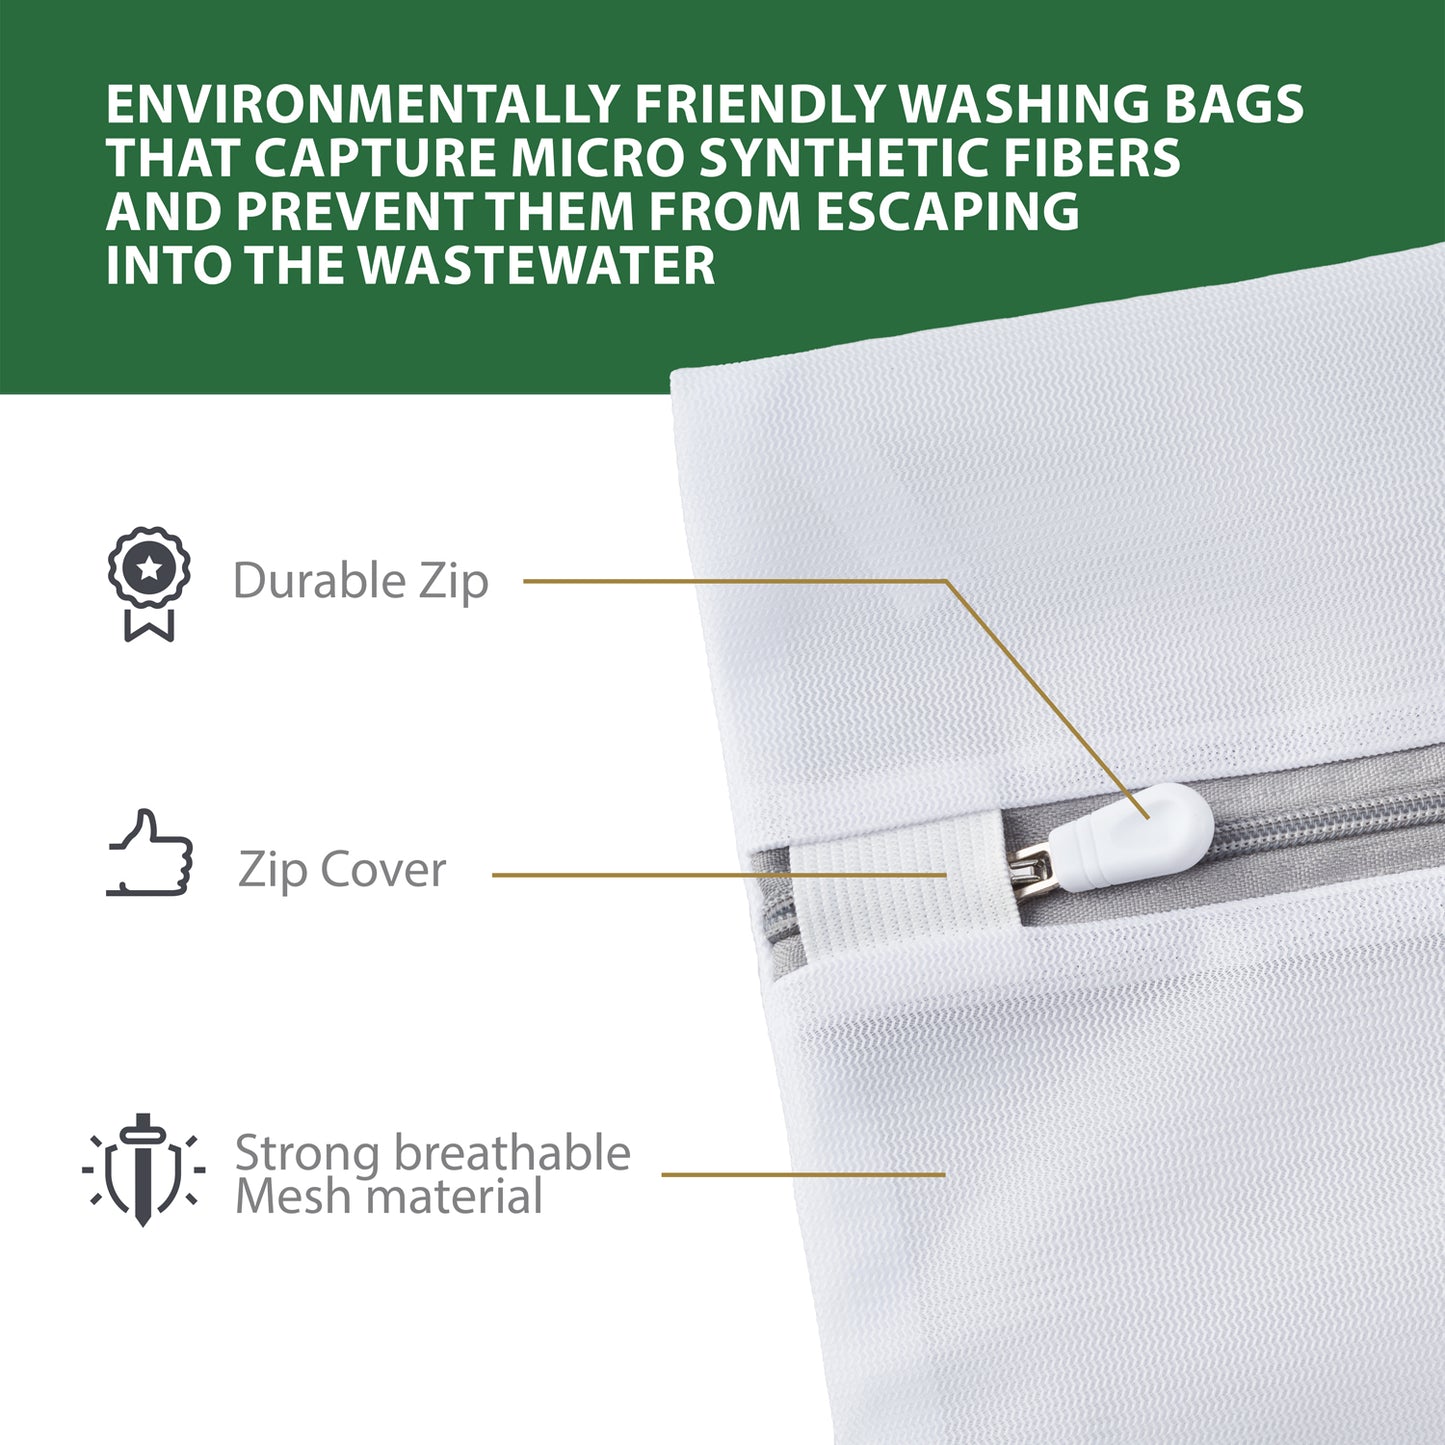 DimBull Washing Machine Laundry Bags prevent micro fibers escaping into waste water